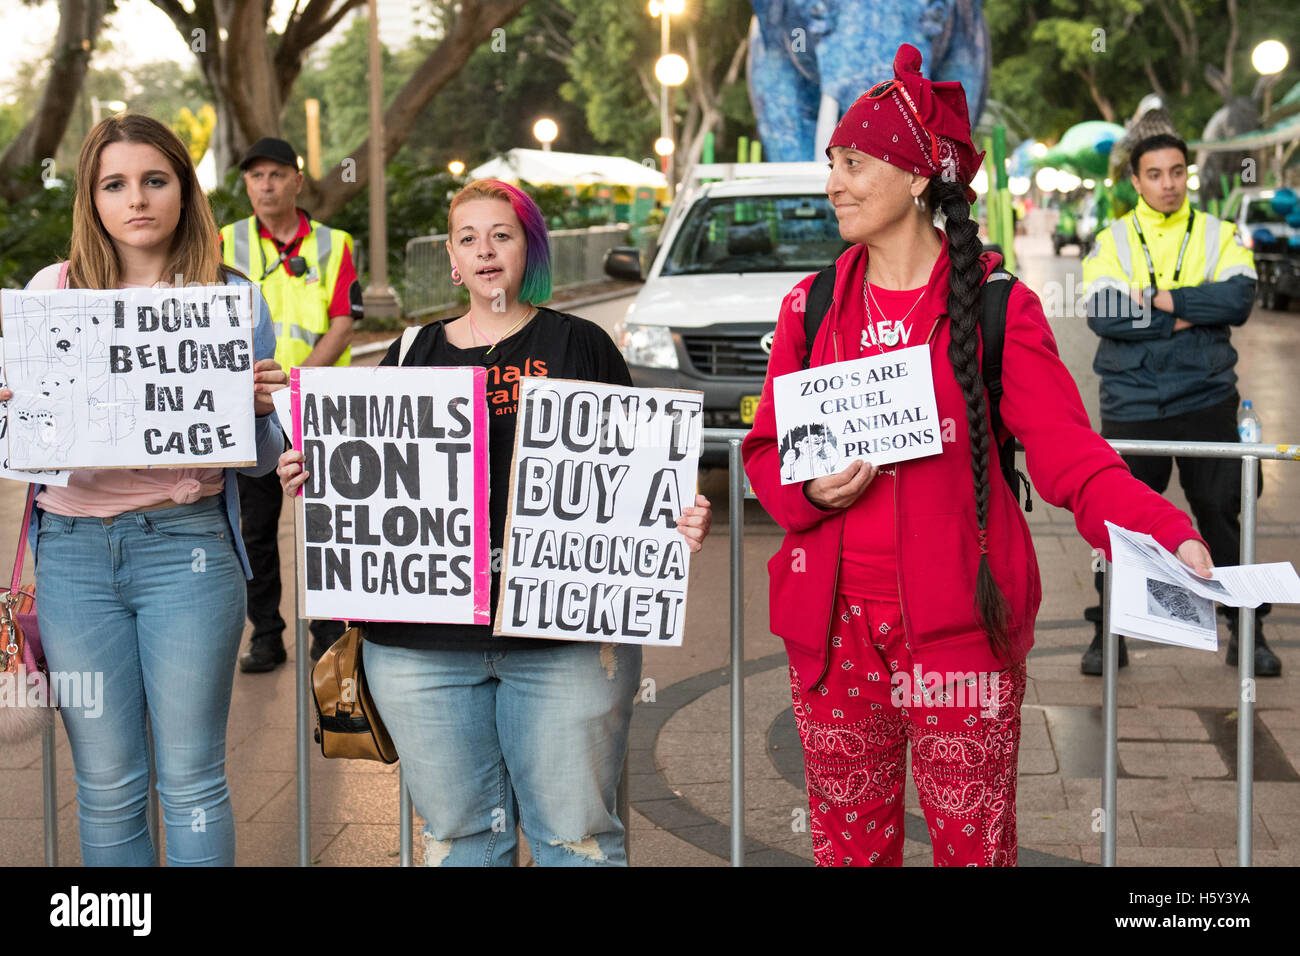 Sydney, Australia - 15th October 2016: A group of animal rights protesters held signs at Hyde Park North protesting against the caging of animals and the operation of zoos. This protest was held ahead of the Taronga Zoo 100th Birthday Parade which marched from Hyde Park to the Sydney Opera House. © mjmediabox/Alamy Live News Stock Photo